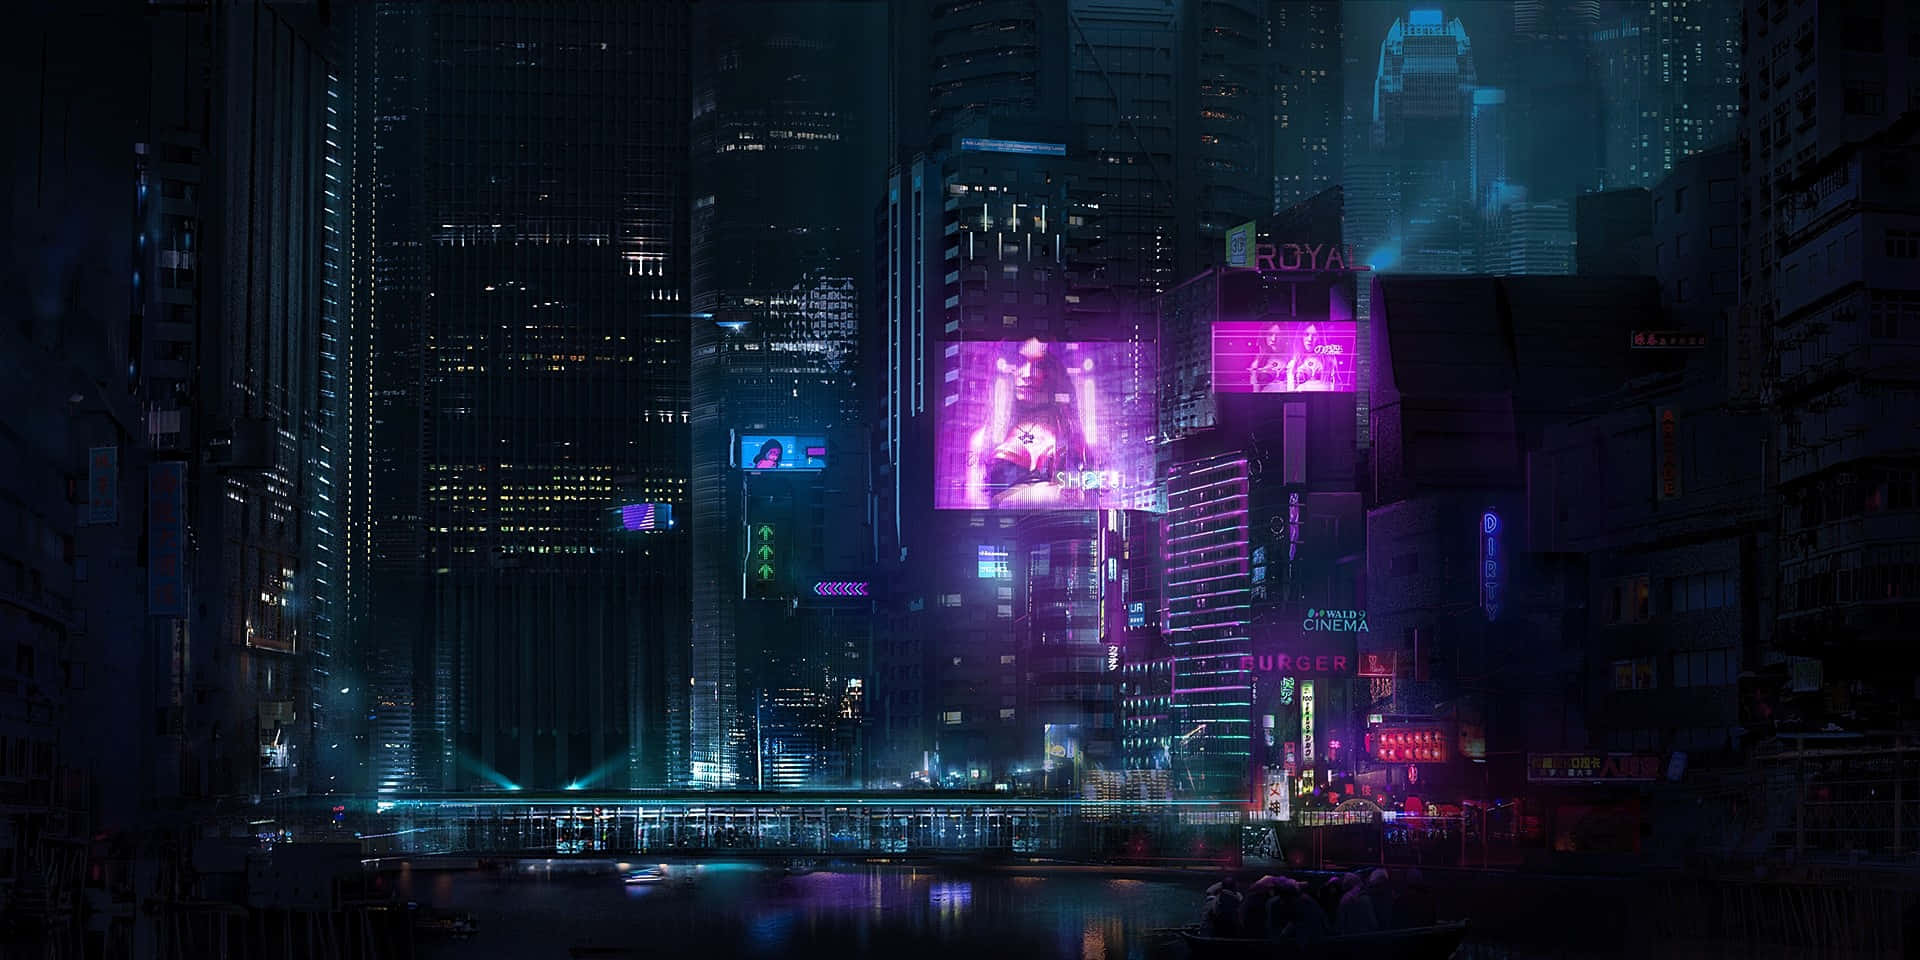 Welcome to the bustling world of the Cyberpunk City